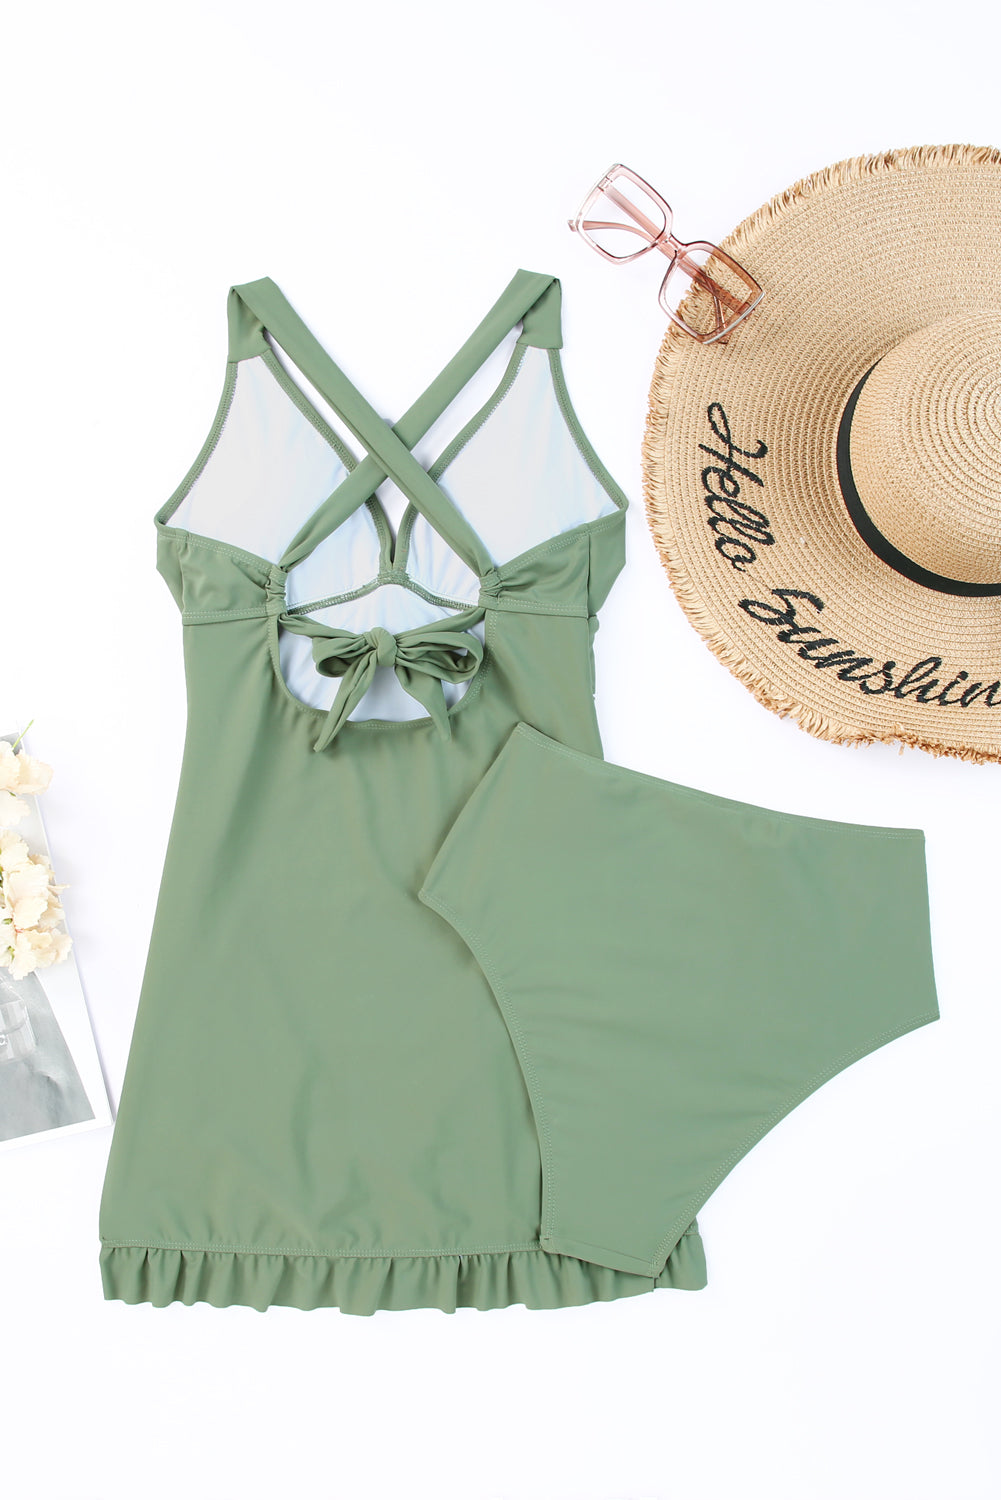 LC415776-9-S, LC415776-9-M, LC415776-9-L, LC415776-9-XL, LC415776-9-2XL, Green Women Criss Cross Back Tie Ruched Ruffled Tankini Bathing Suit with Shorts